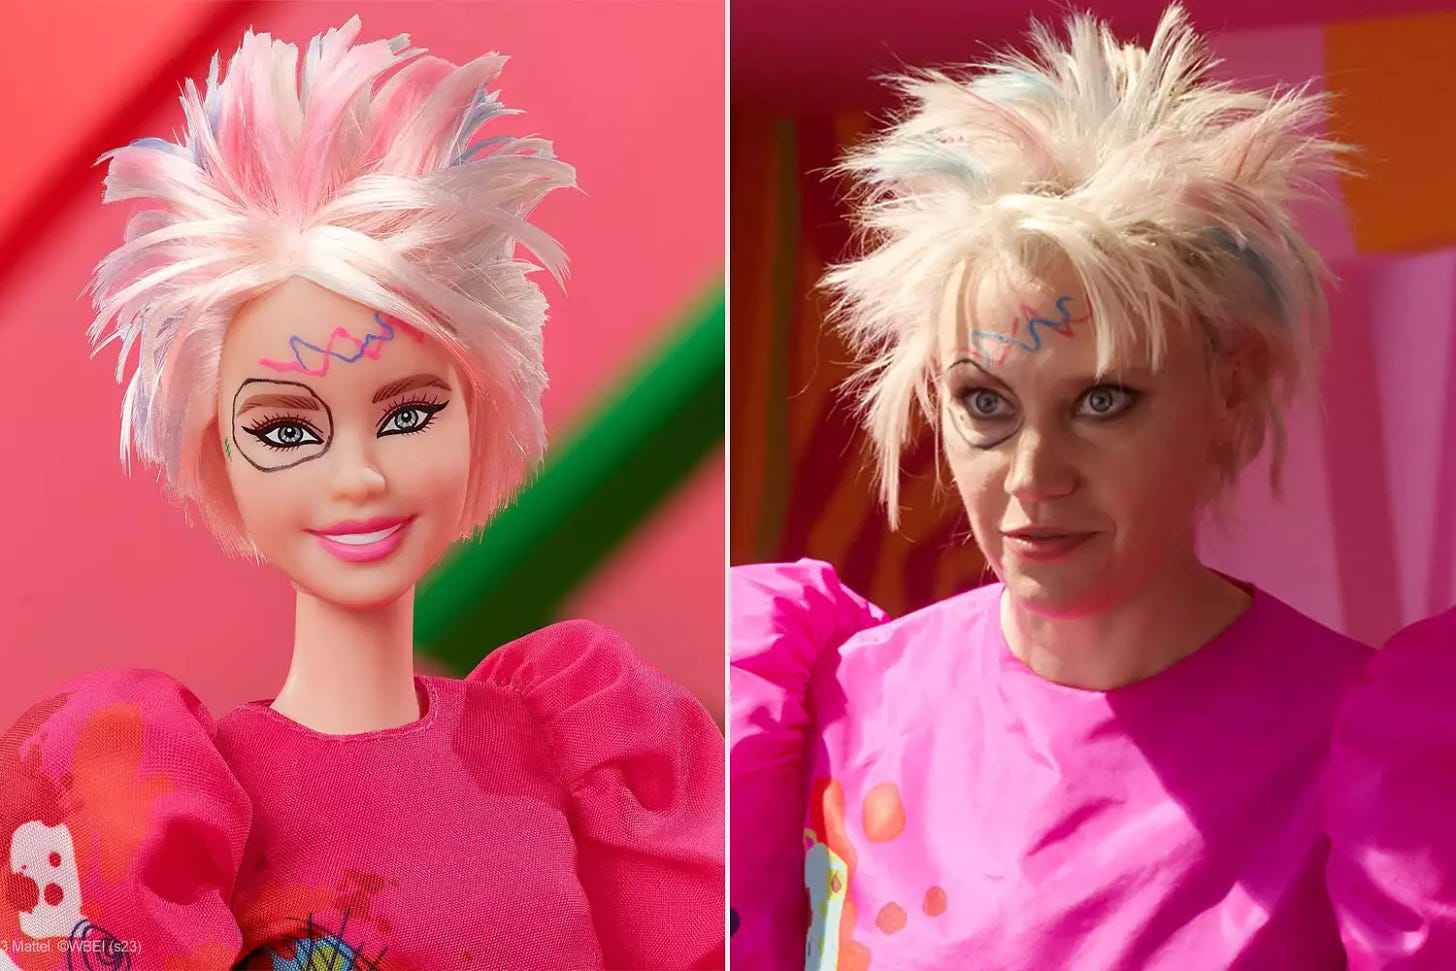 You Can Now Buy Kate McKinnon's Weird Barbie from Hit Movie